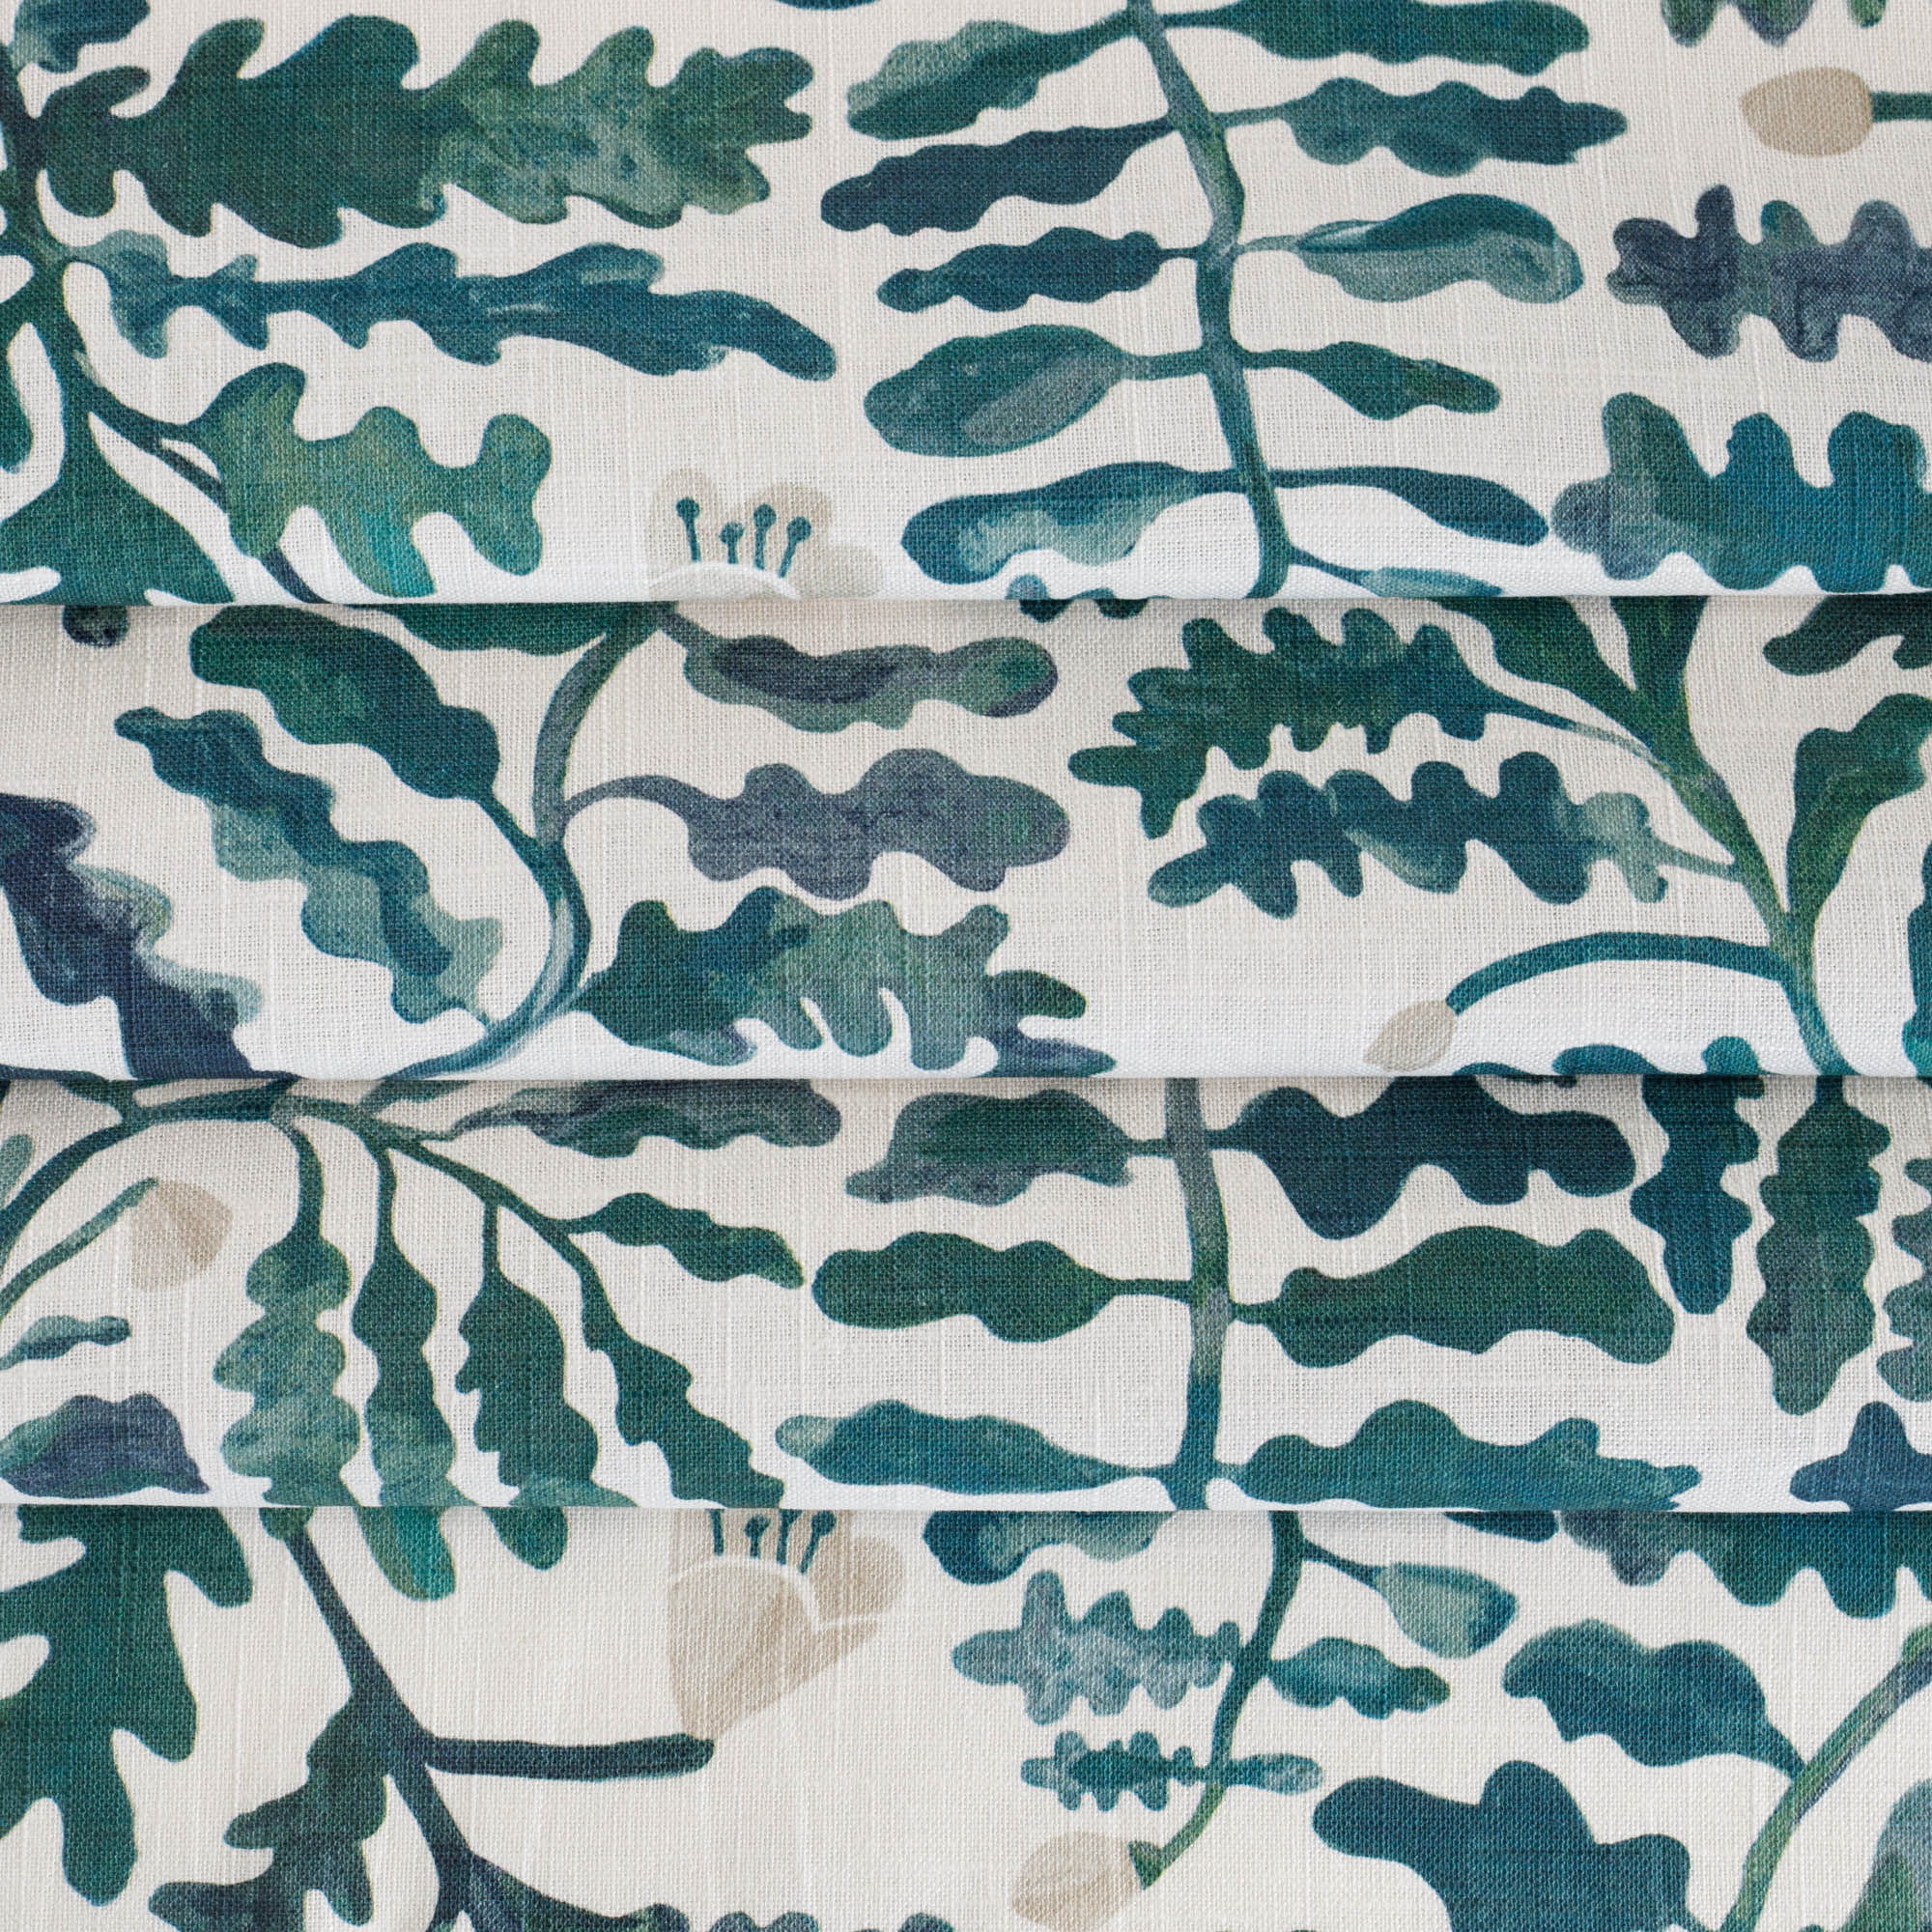 a green and white leafy botanical print home decor linen blend fabric 